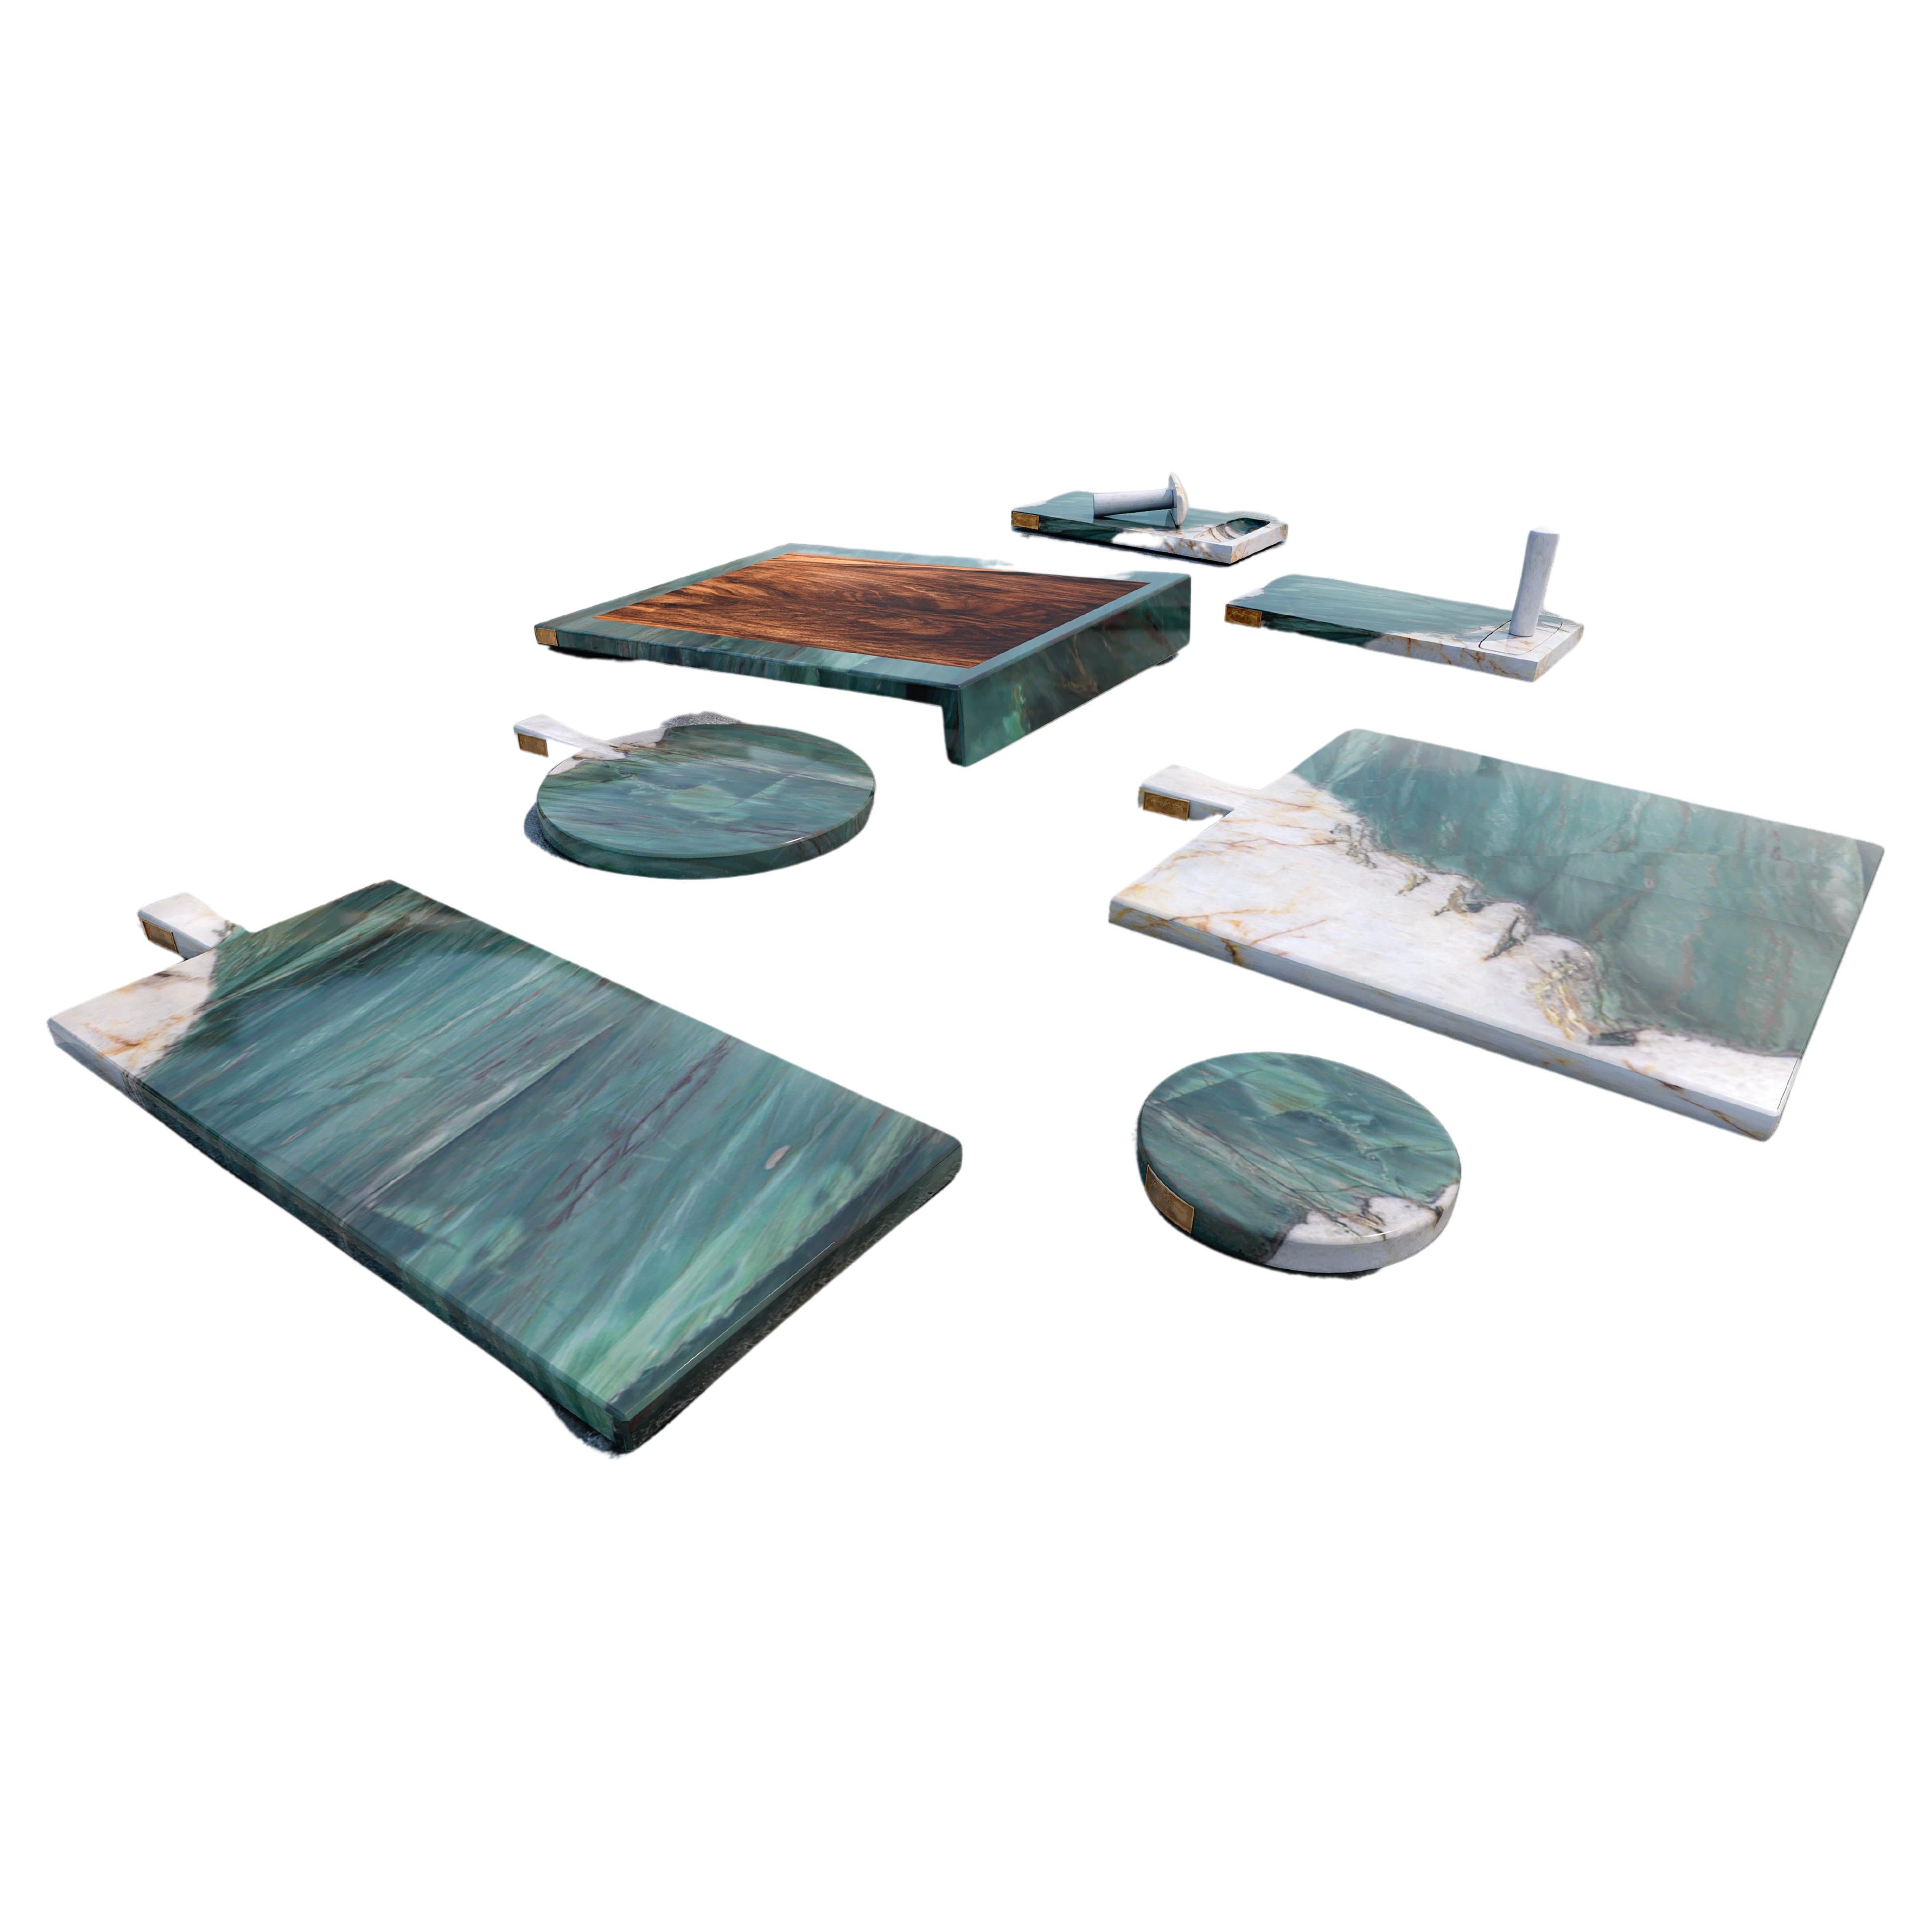 Patagonia Green marble kitchen accessories set by Jérôme Bugara For Sale